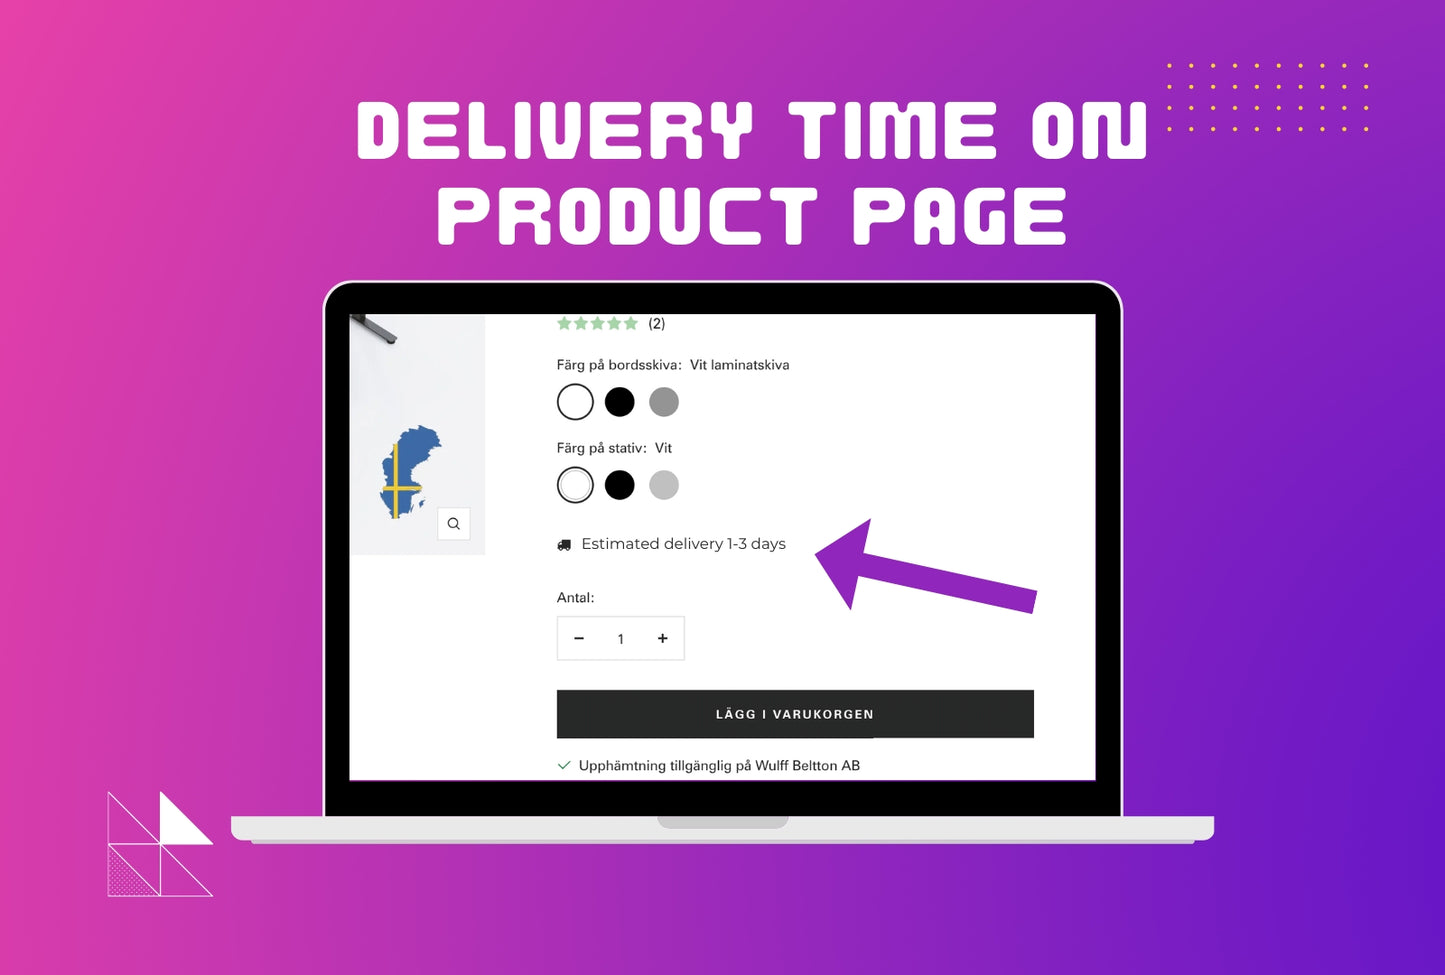 Show Estimated Delivery Time on Collection and Product Pages